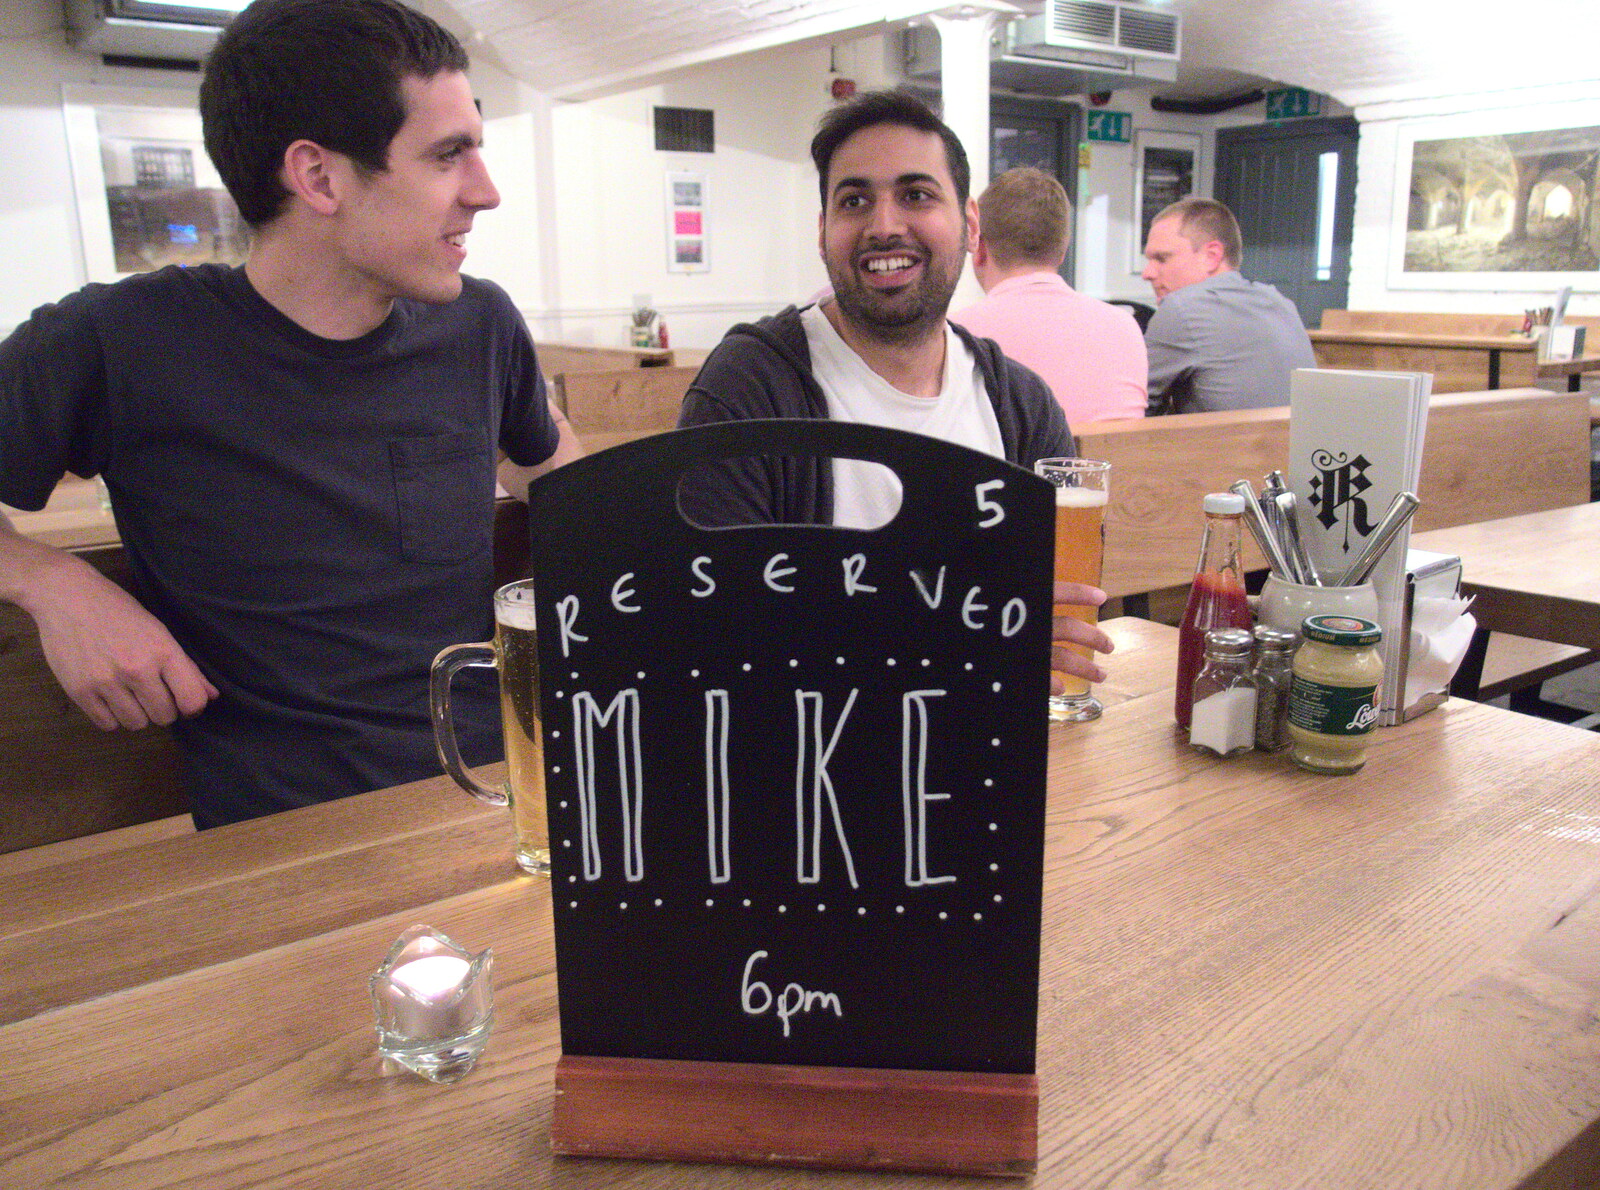 Our table: reserved for Mike from The BBs at New Buckeham, and Beers at Katzenjammer's, London - 16th May 2016